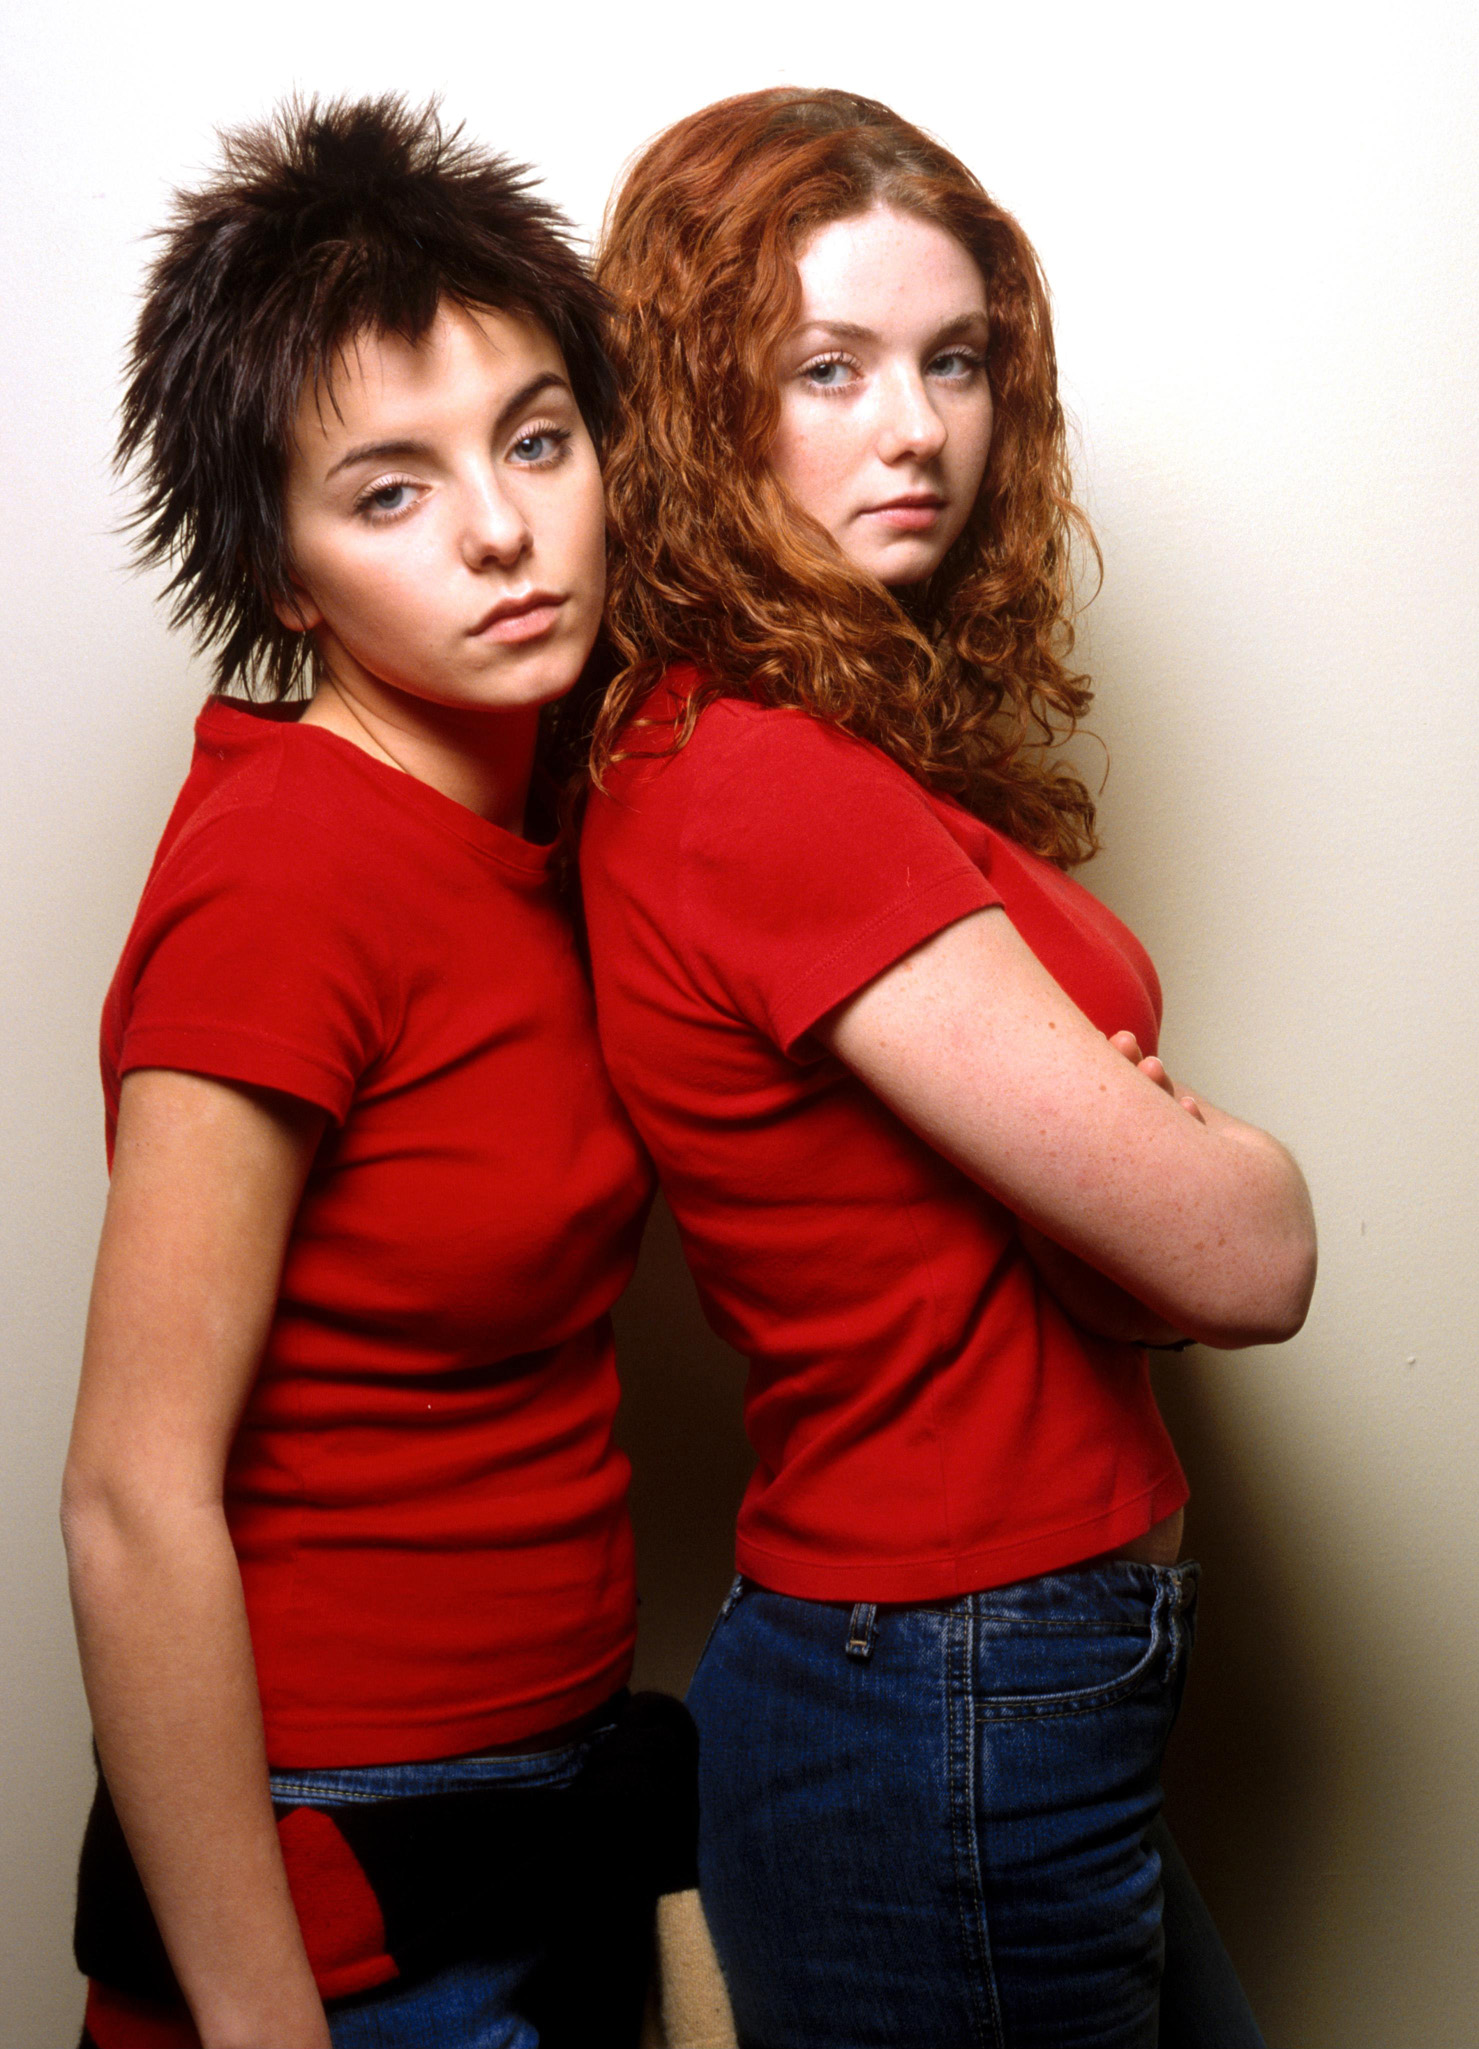 Tatu 290106 Web Wallpapers Free Pictures Download Hq Photos